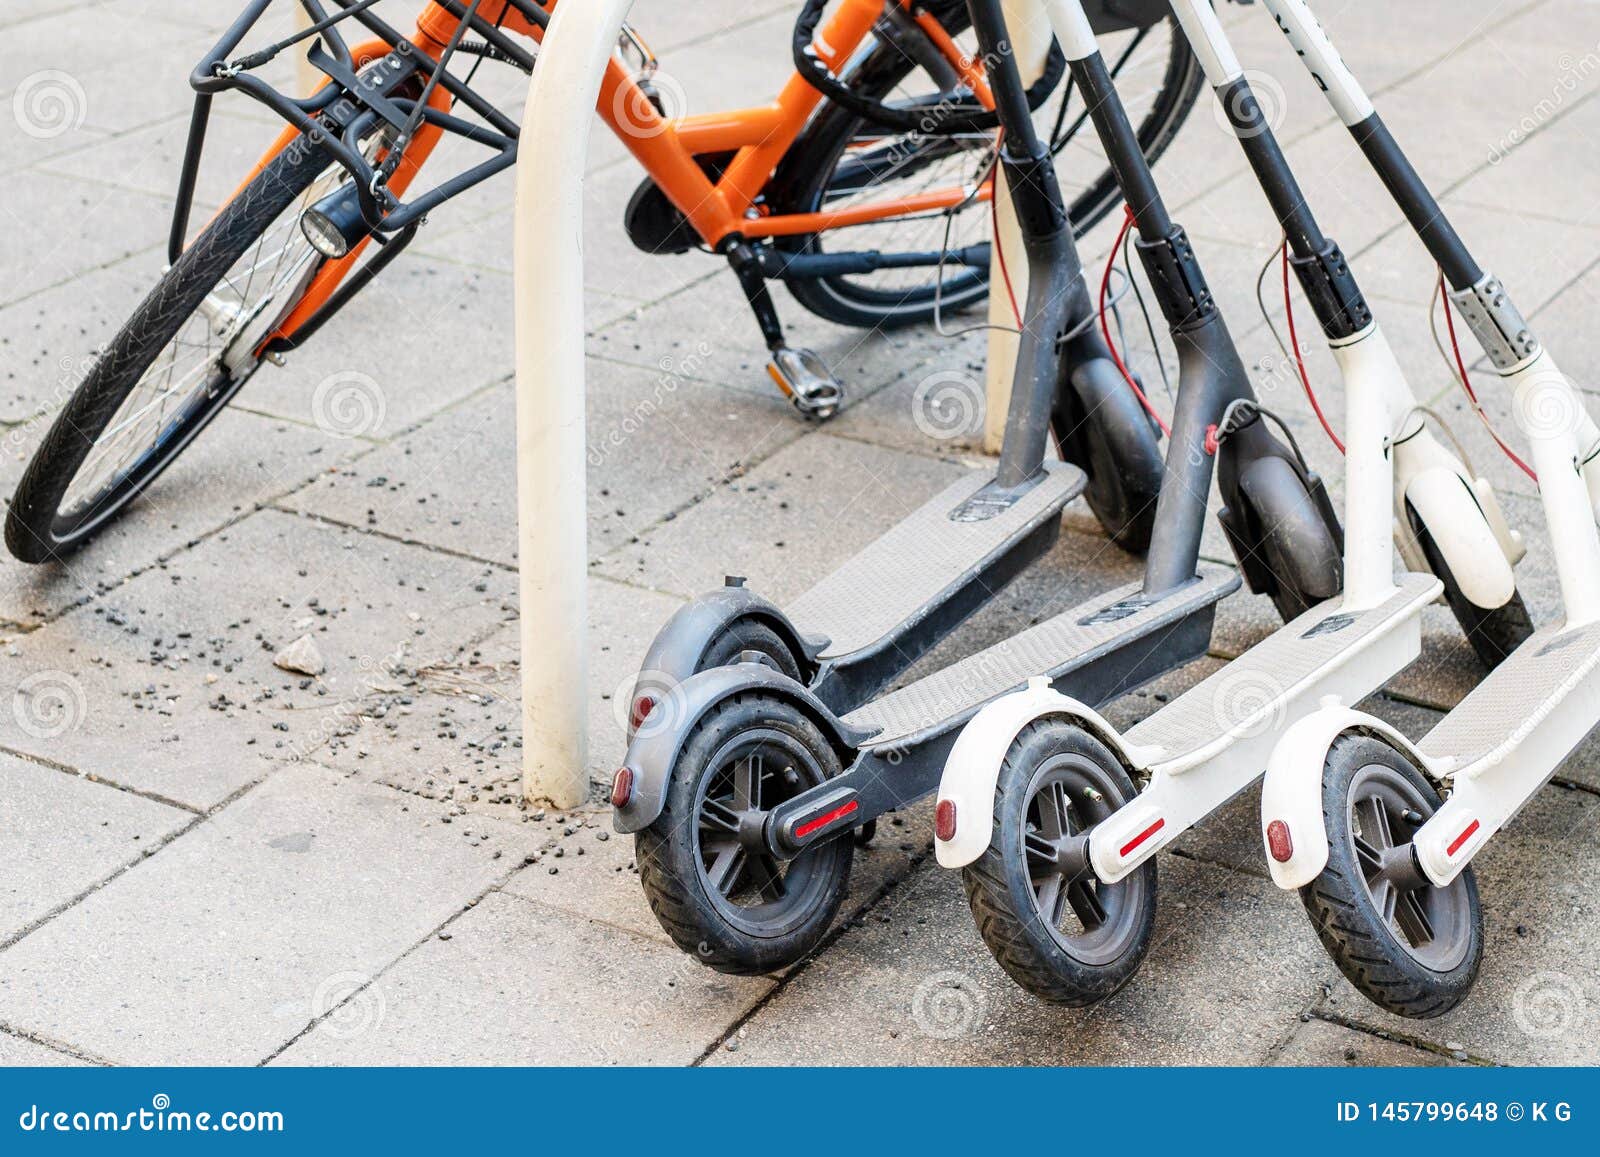 bicycle and electric scooters parked on city street. self-service street transport rental service. rent urban vehicle with